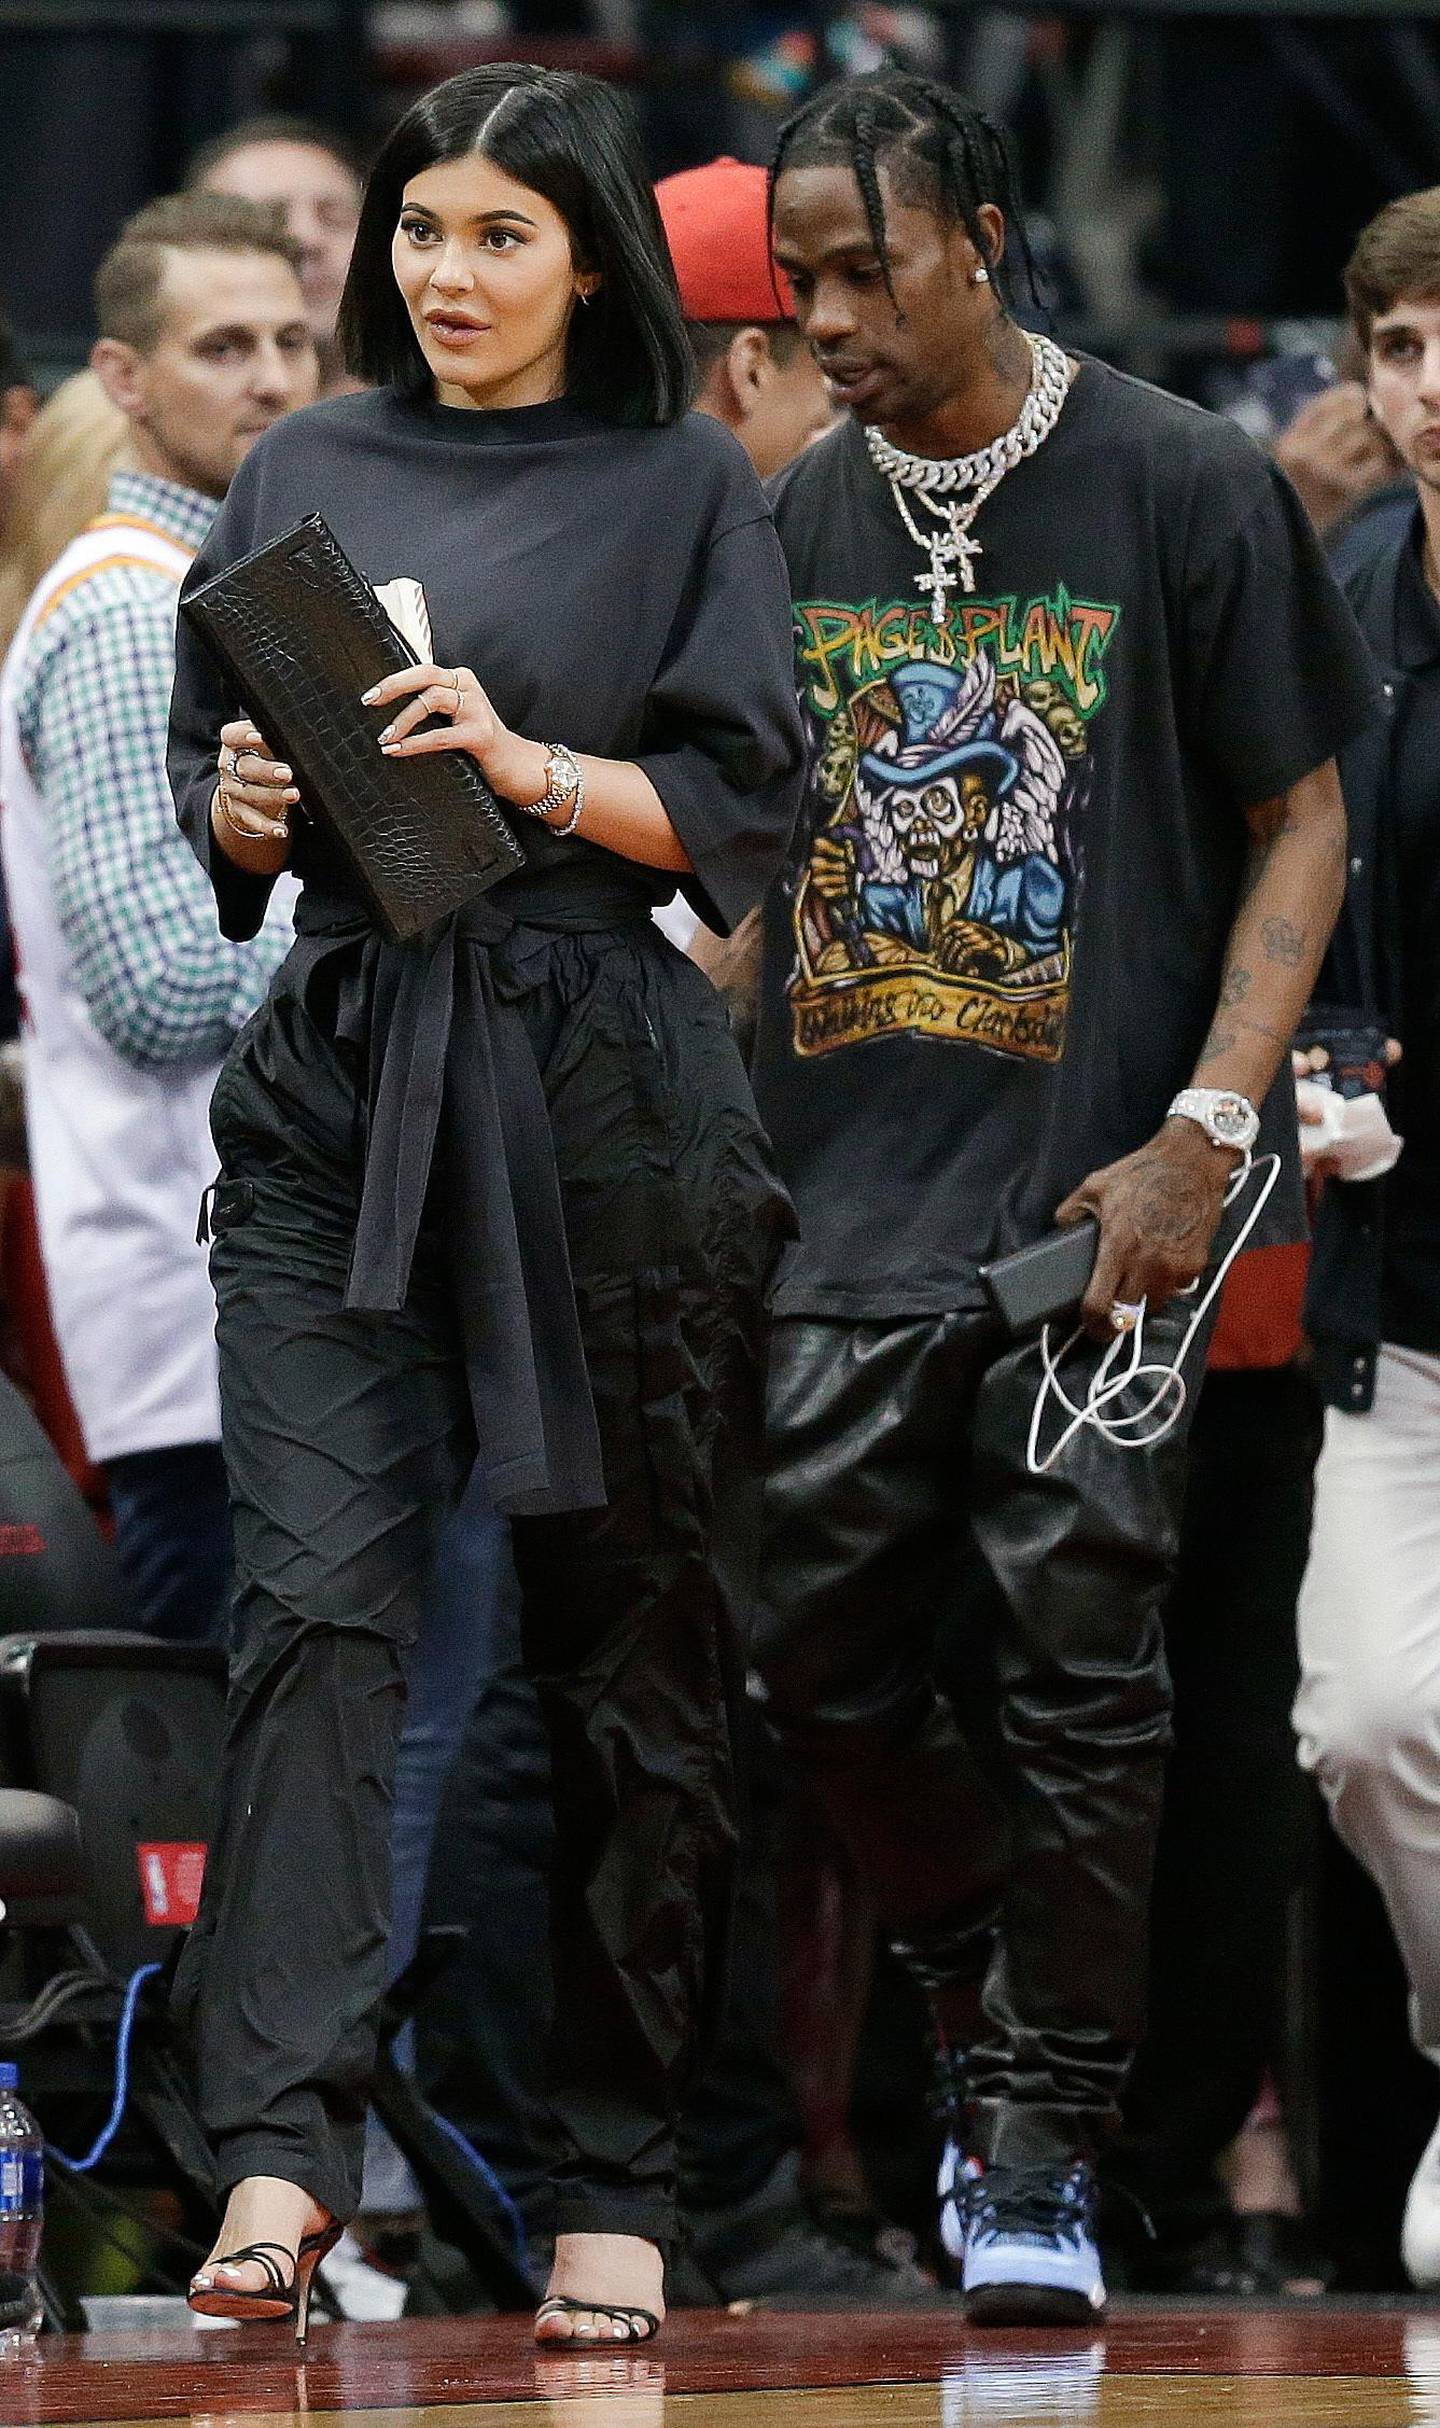 Kylie Jenner, left, and Travis Scott walks to their seats during the second half in Game 2 of a first-round NBA basketball playoff series between the Houston Rockets and the Minnesota Timberwolves, Wednesday, April 18, 2018, in Houston. (AP Photo/Eric Christian Smith)